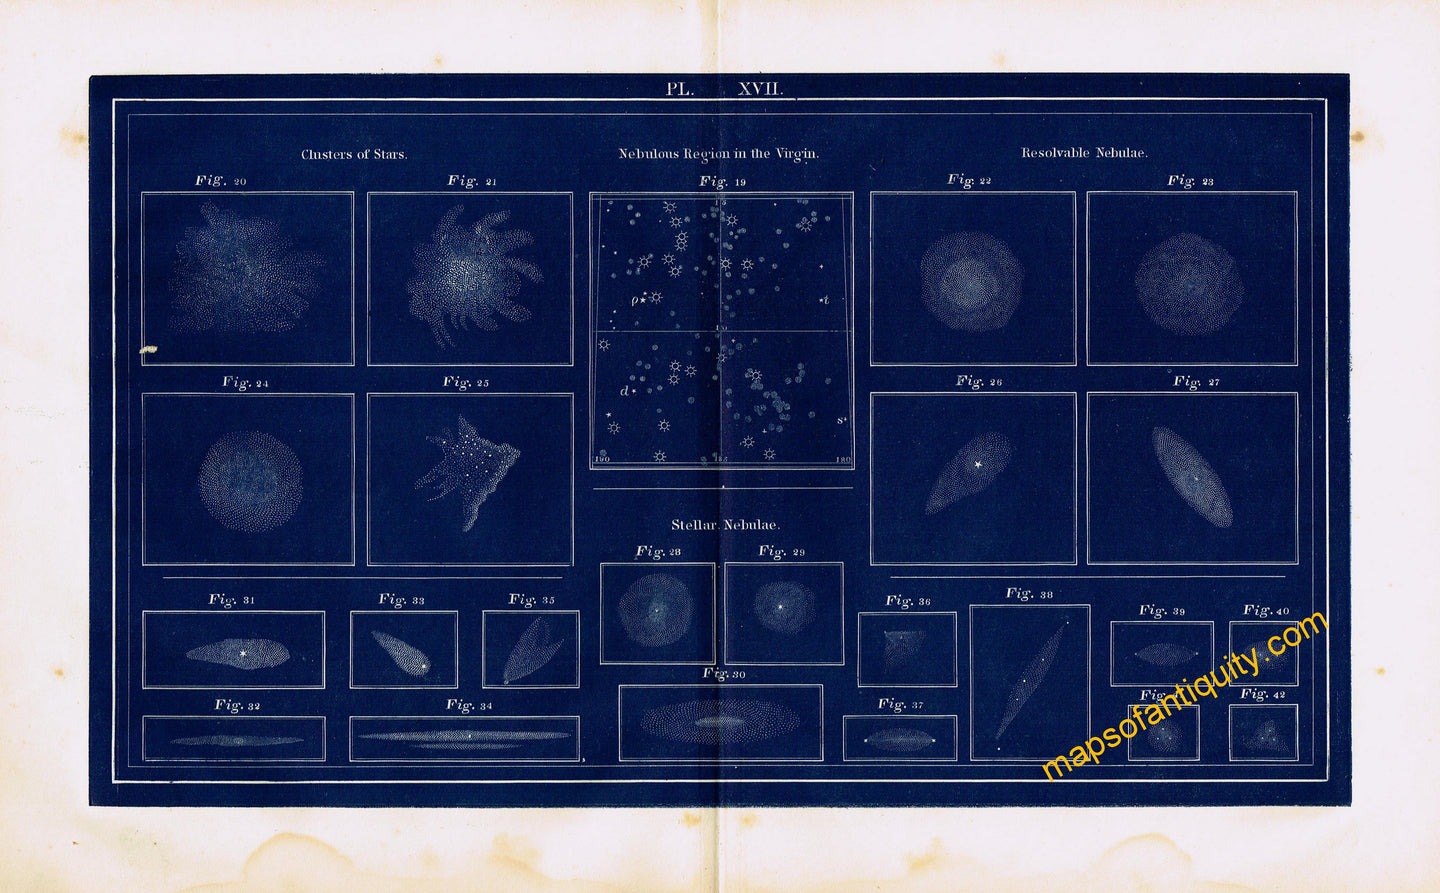 Antique-Printed-Color-Celestial-Map-Plate-XVII-with-Star-Clusters-Stellar-Nebulae-Resolvable-Nebulae-and-the-Nebulous-Region-in-the-Virgin-**********-Celestial--1846-Butler-Maps-Of-Antiquity